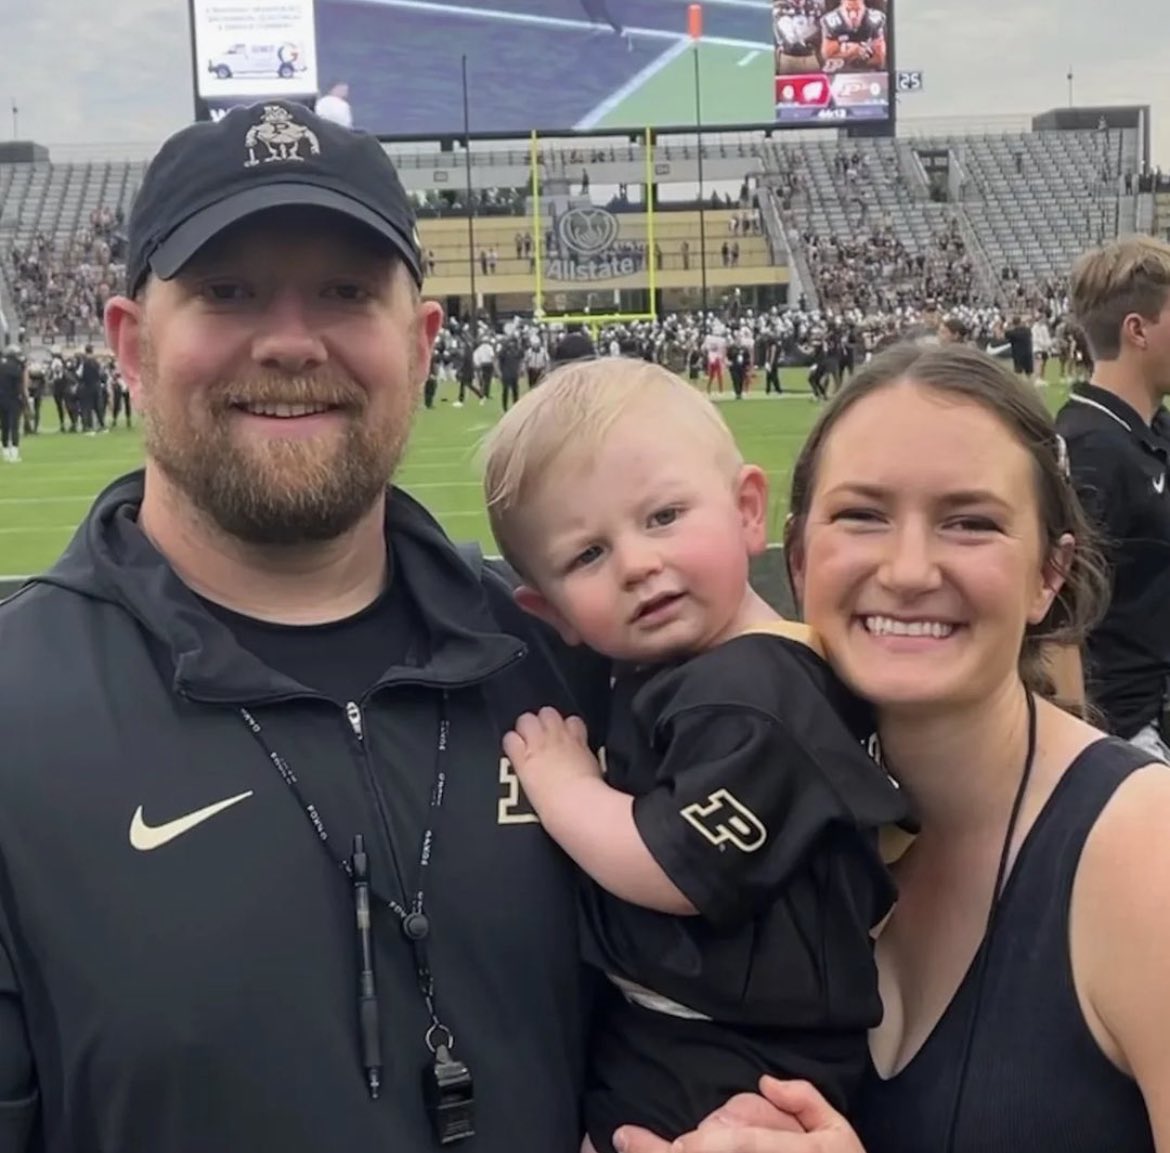 Boiler Nation, Purdue Football Associate Director of Strength and Conditioning Nate Rock’s son Jack was really diagnosed with leukemia. Join us in offering prayers of support for Jack and his family.